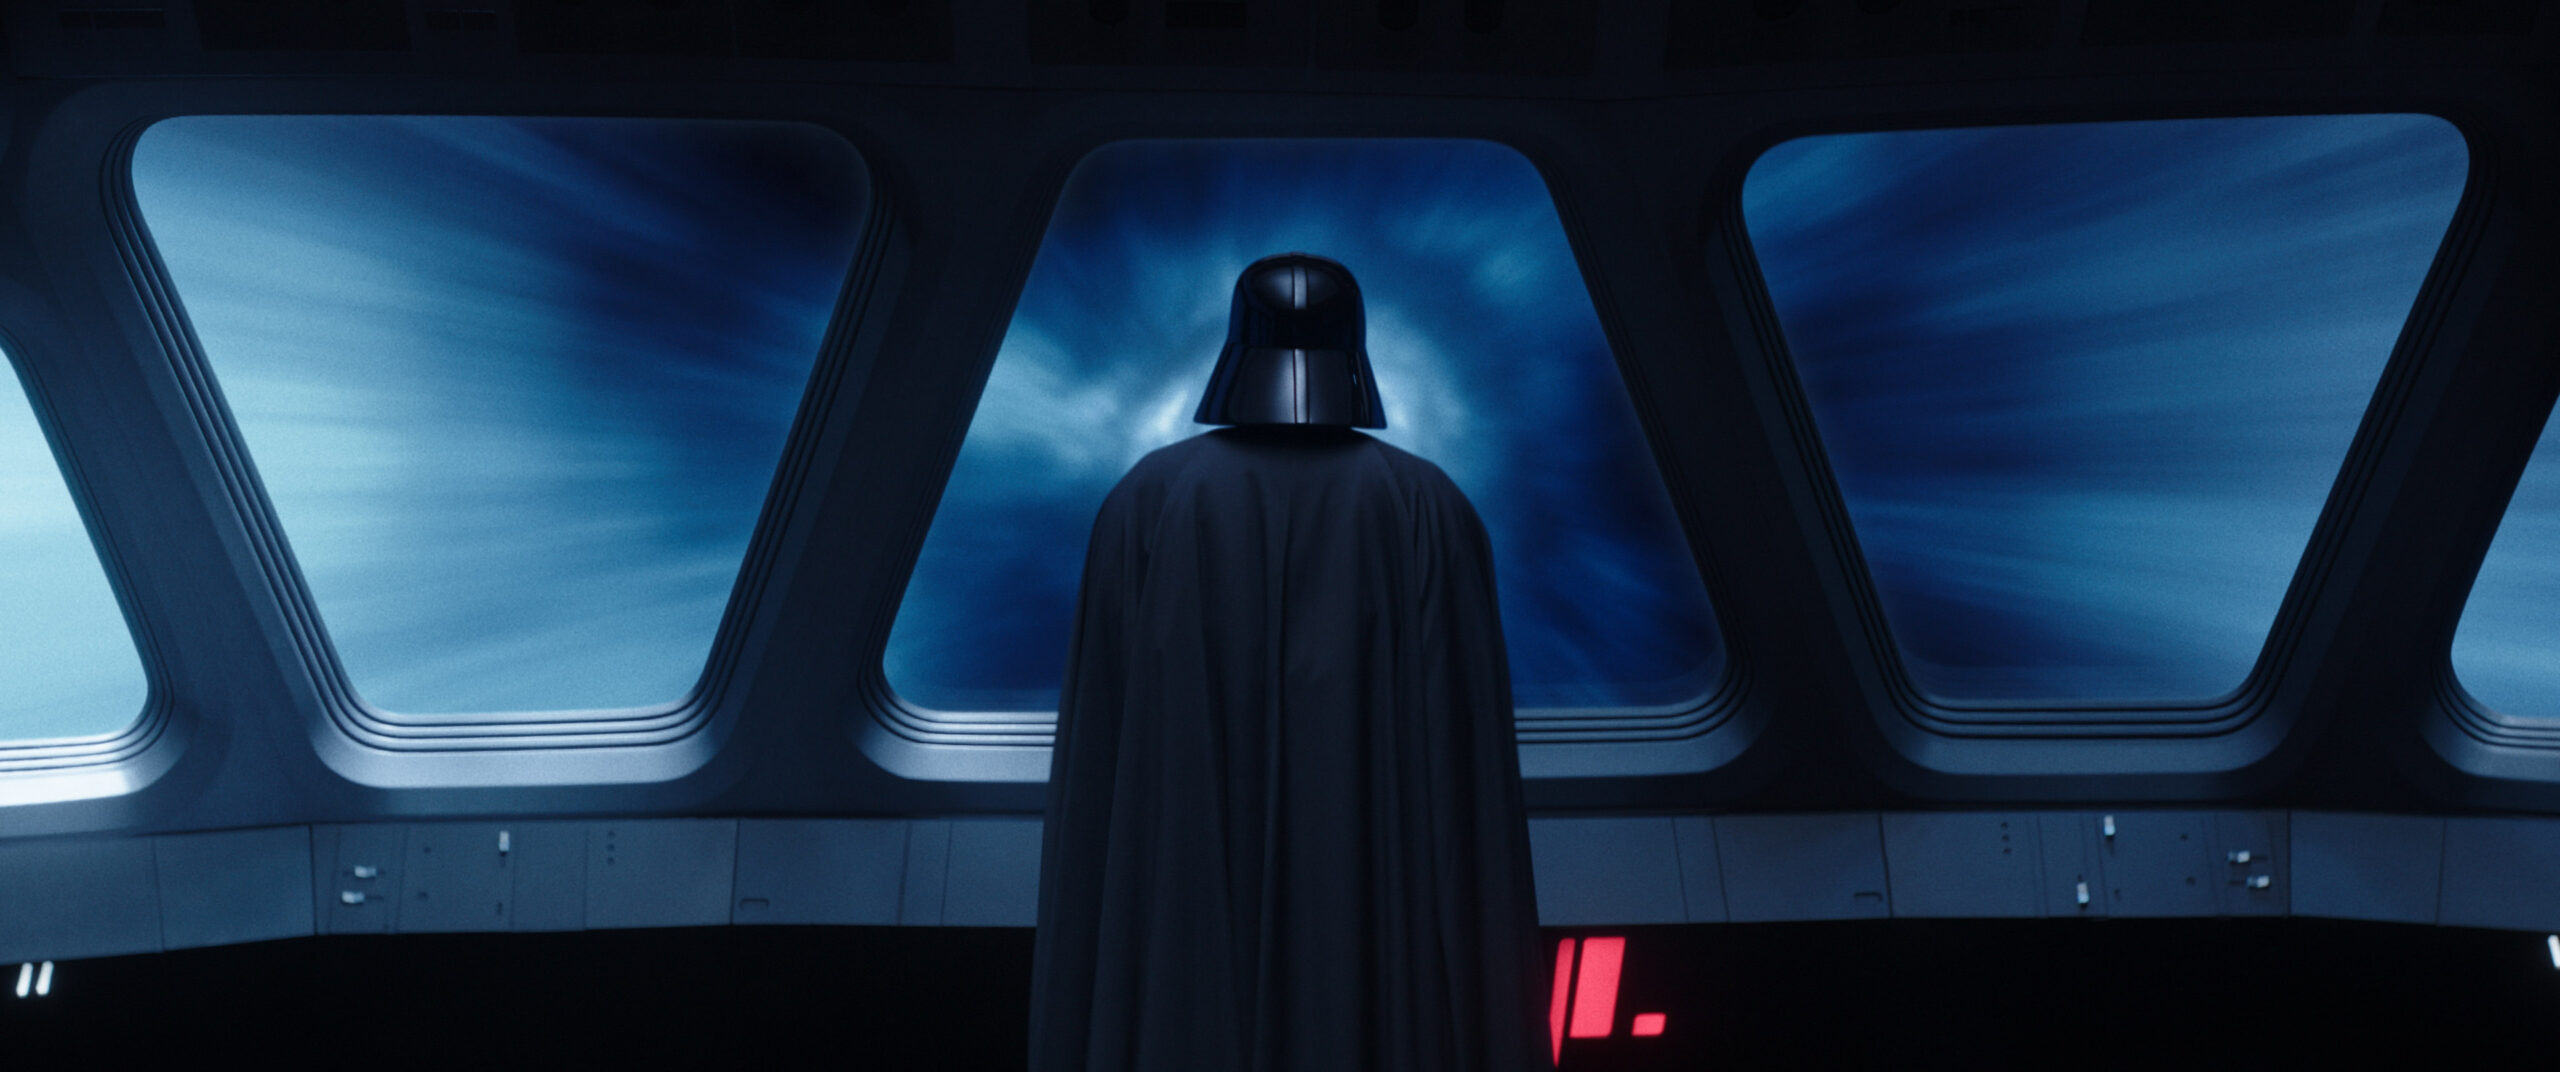 Darth Vader reflects about his past with Obi-Wan in Obi-Wan Kenobi Episode 5